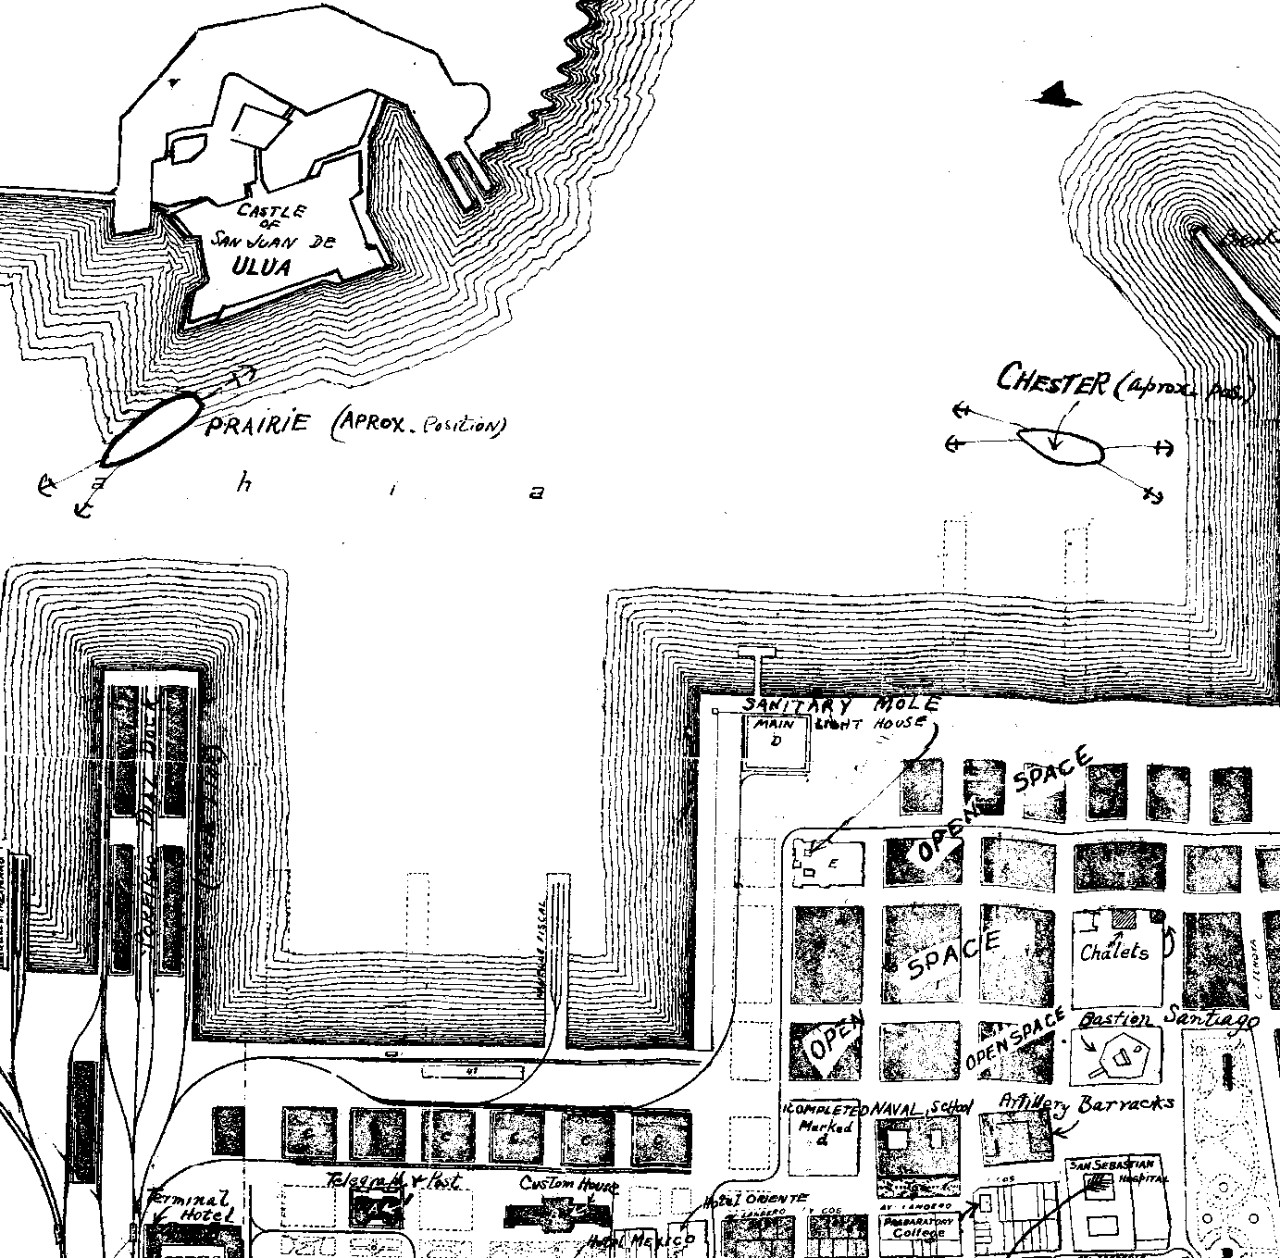 A black and white map showing ships in the inner harbor and nearby city blocks. Clicking this image directs to the full map.